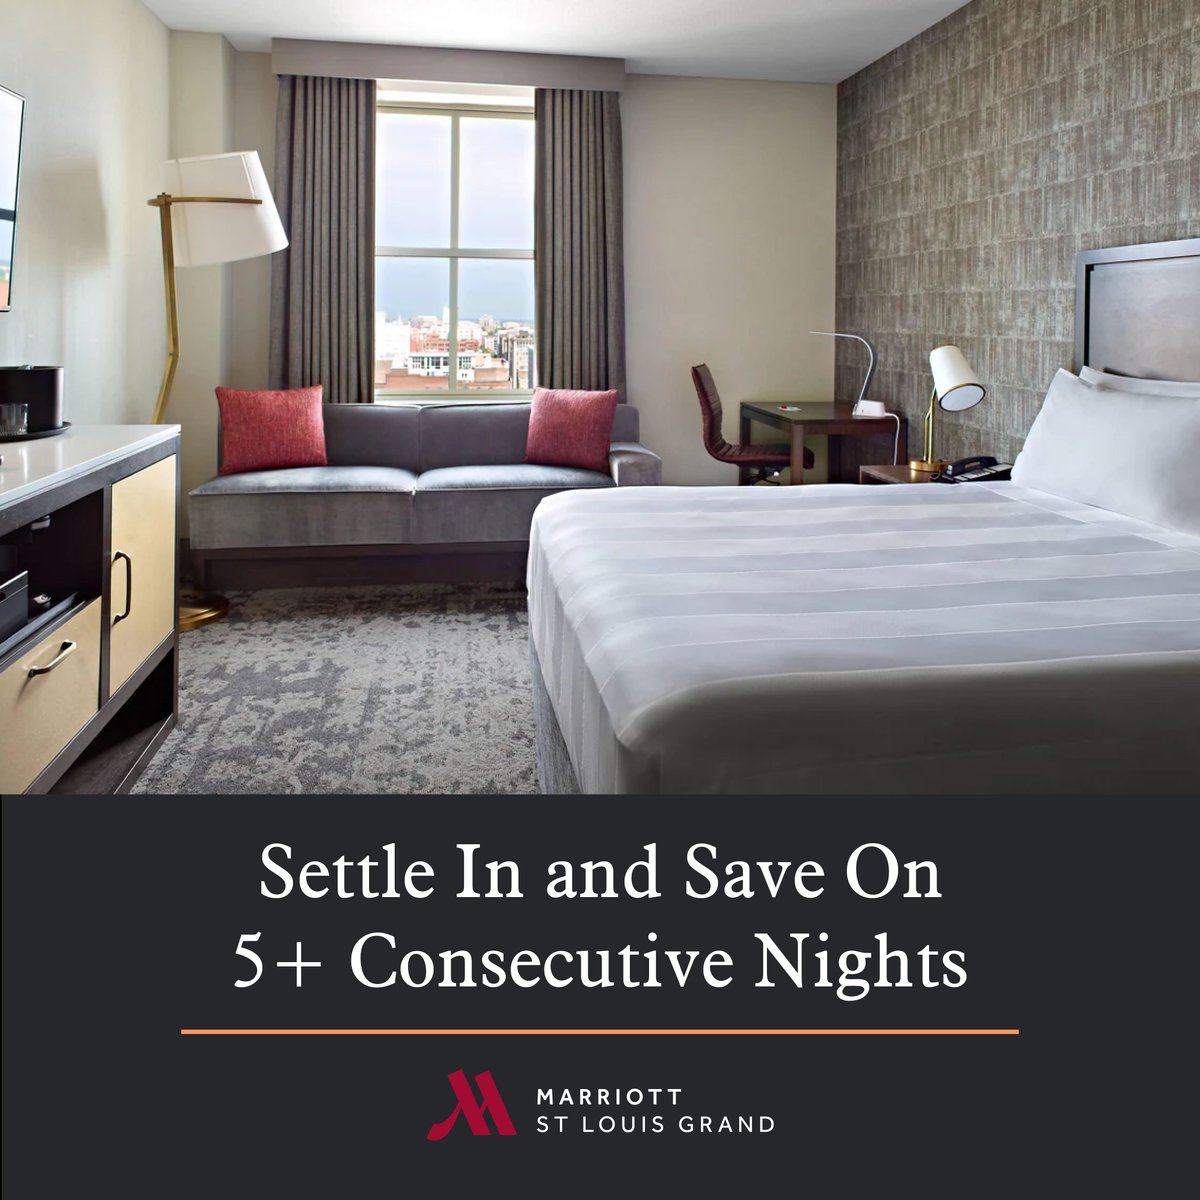 Stay and Save! ✨💵

Stay at Marriott St. Louis Grand for 5+ nights and receive a SPECIAL rate! 🤩

Book today on our website: buff.ly/3lBeHNr
.
.
#MarriottStLouisGrand #HelloSTL #HelloMarriottSTL #explorestlouis #staycation #explorestl #travelstl #StayandSave